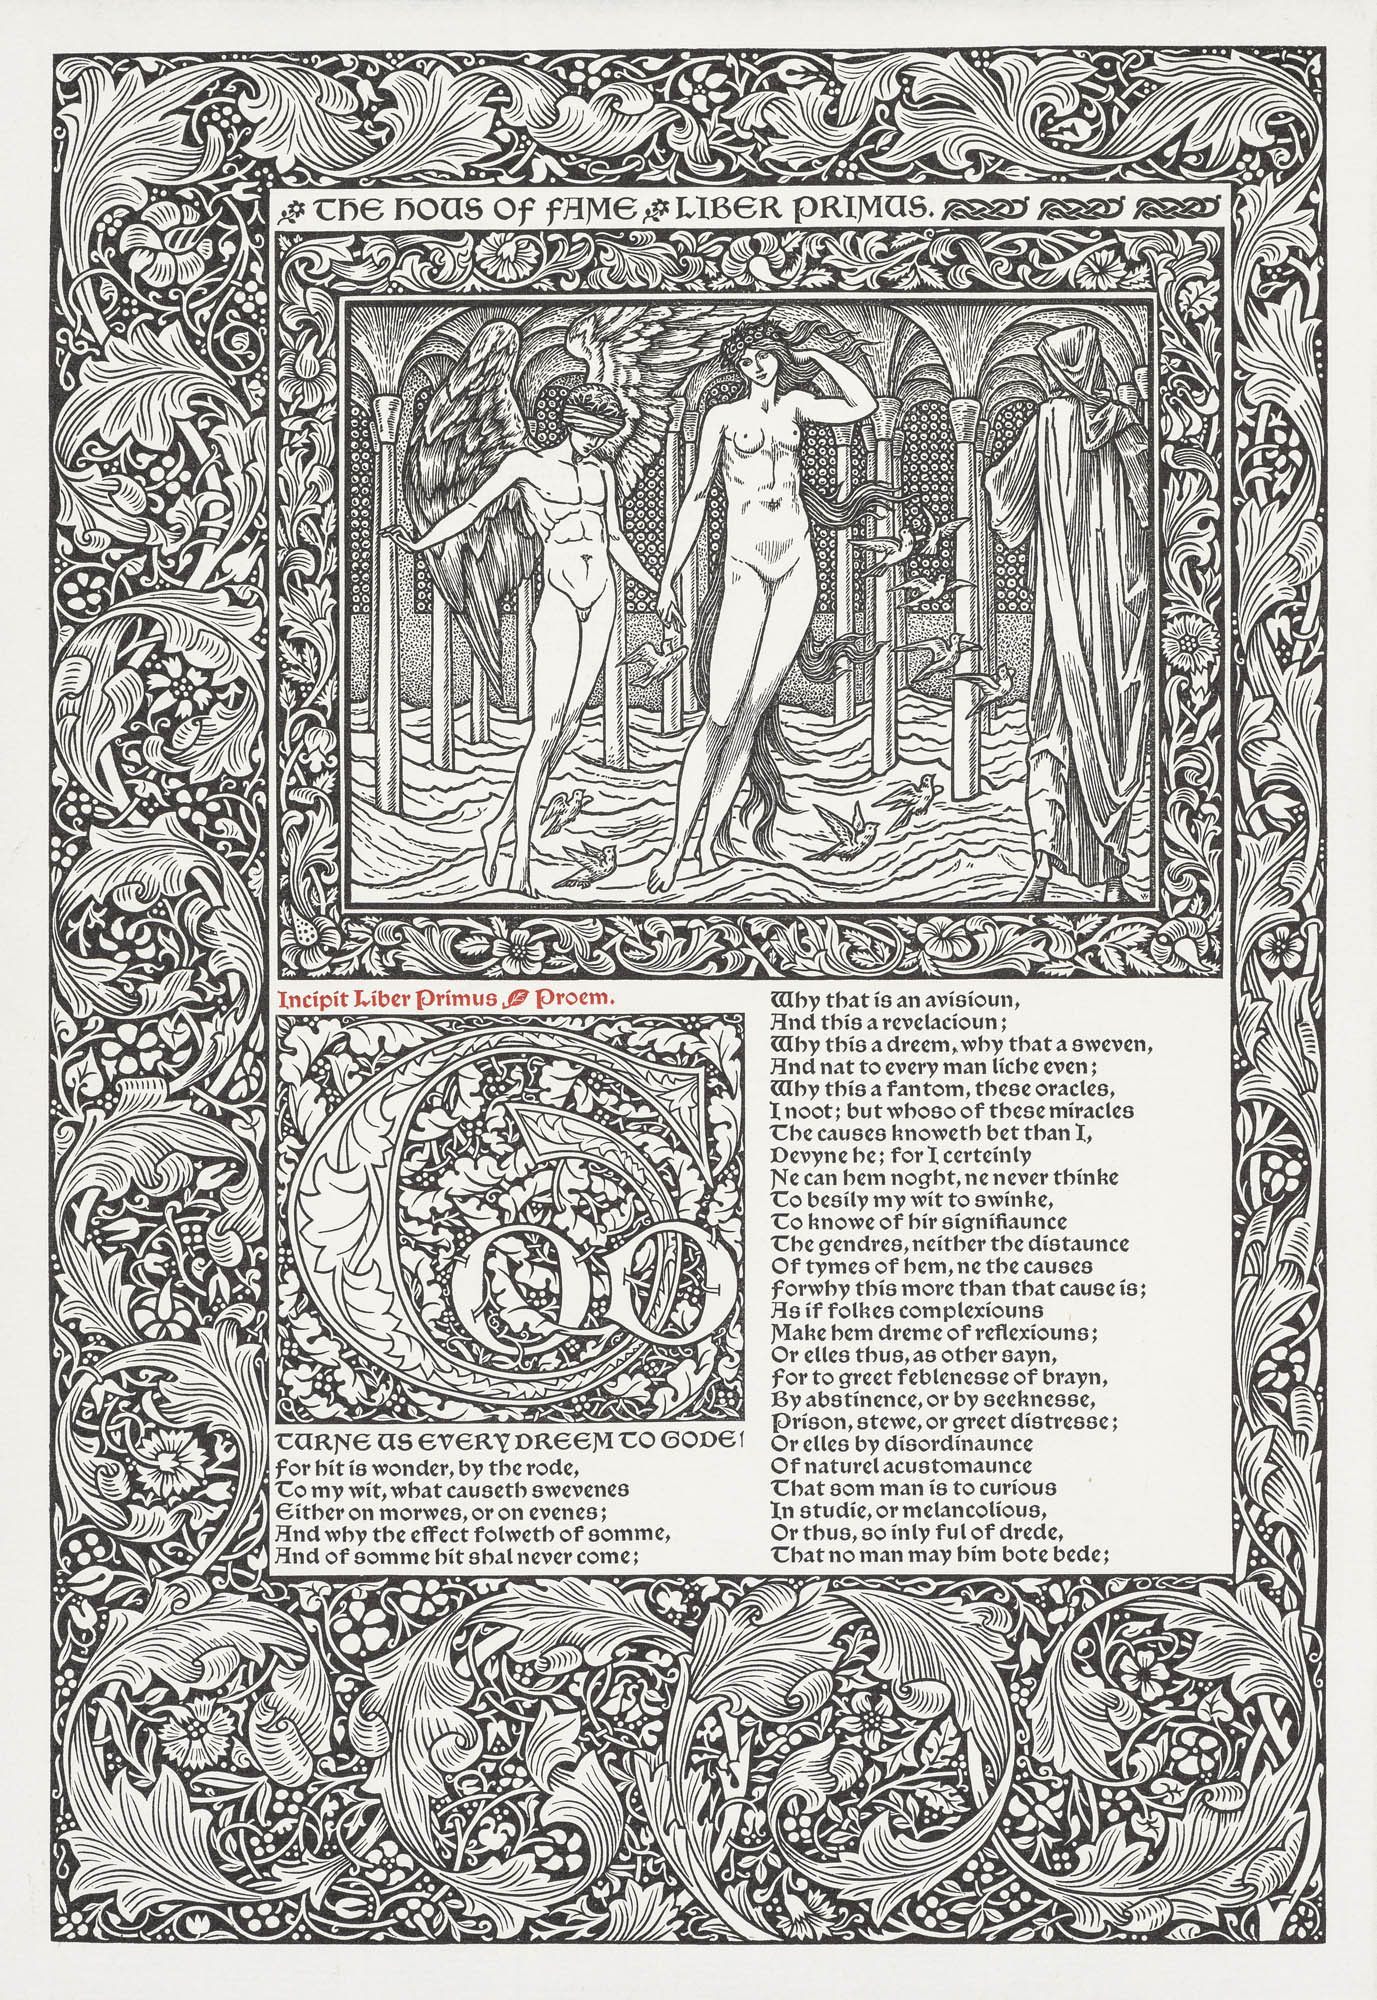 The Works of Geoffrey Chaucer William Morris Book